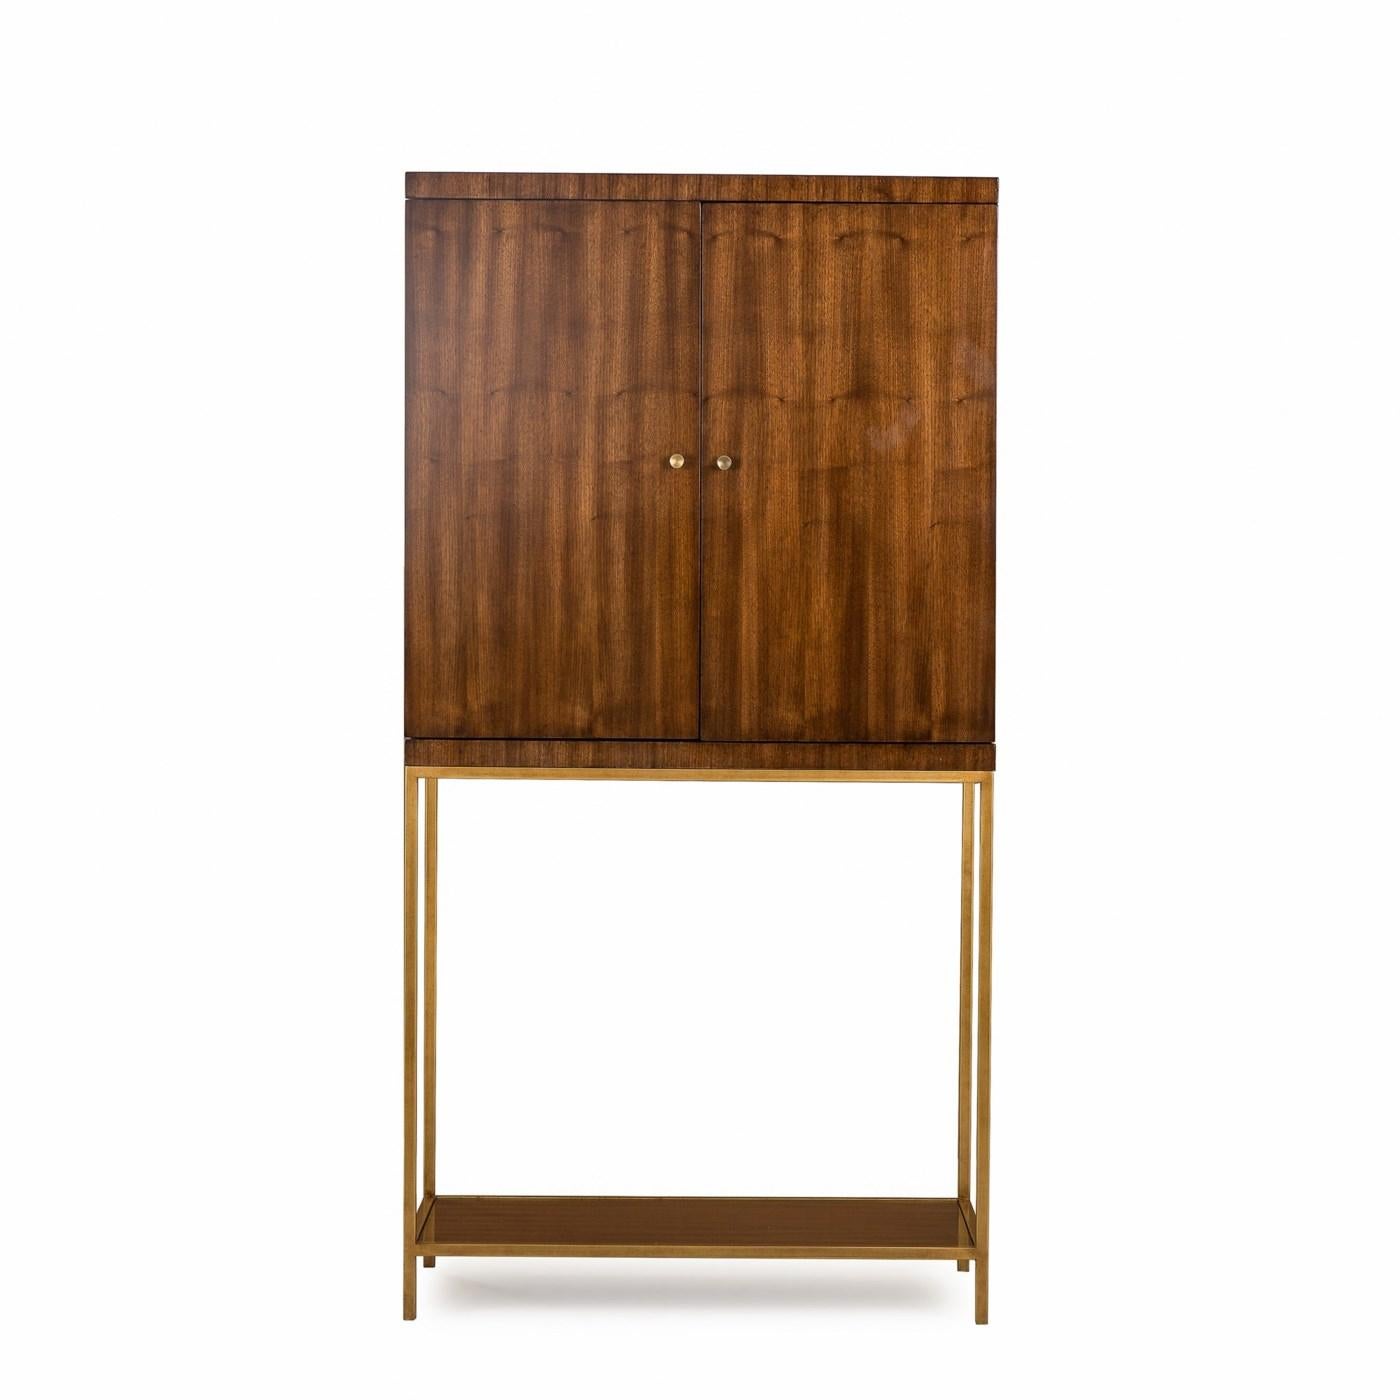 Bar Carolina with structure in metal in brass
finish with solid oak and solid walnut structure.
In varnished walnut finish. Inside with storage 
for large bottles and glasses, racks and an
additional drawer.

 